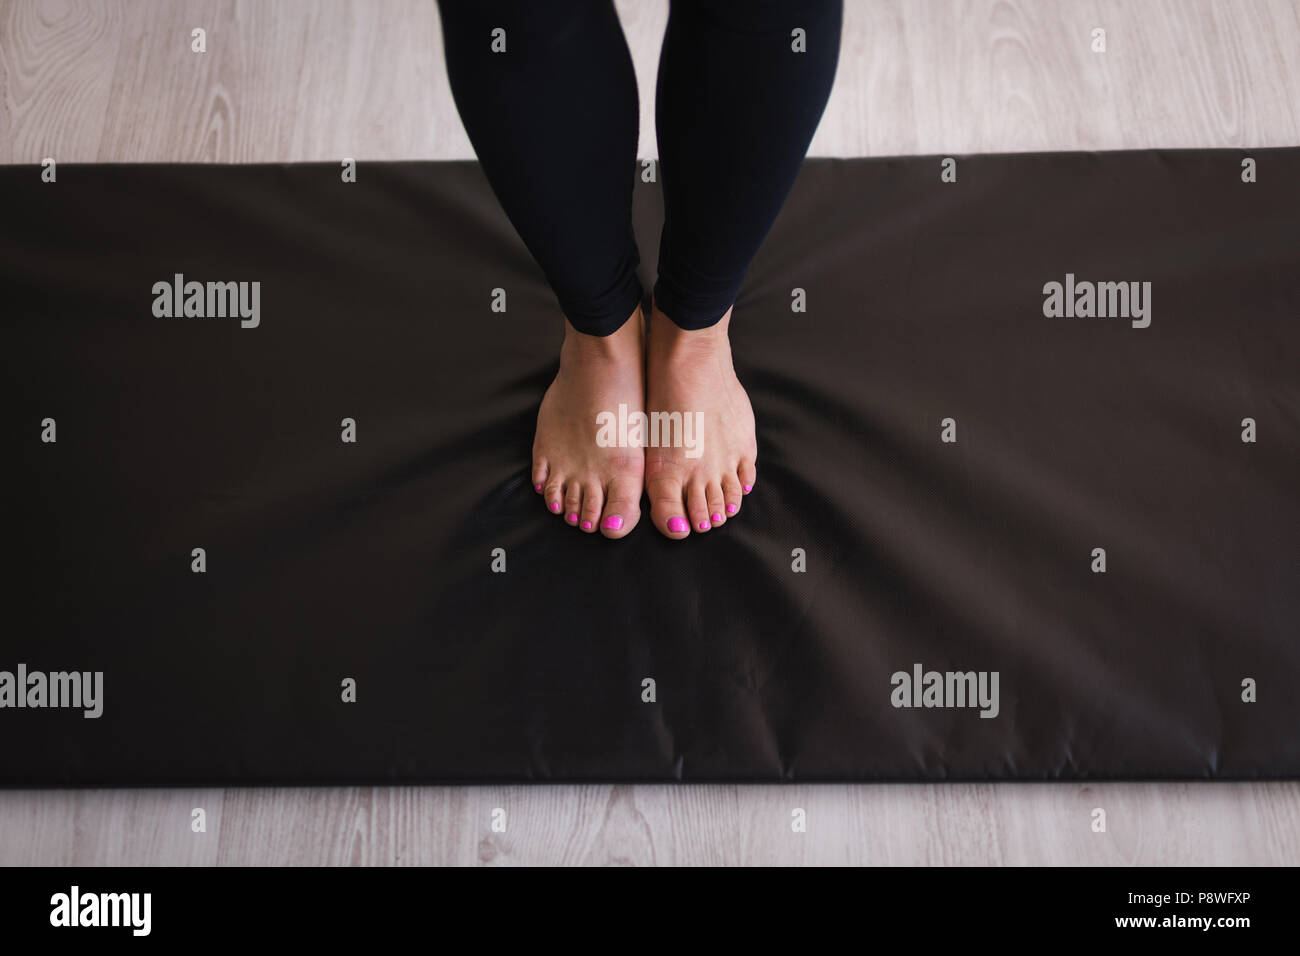 Woman performing stretching exercise Stock Photo